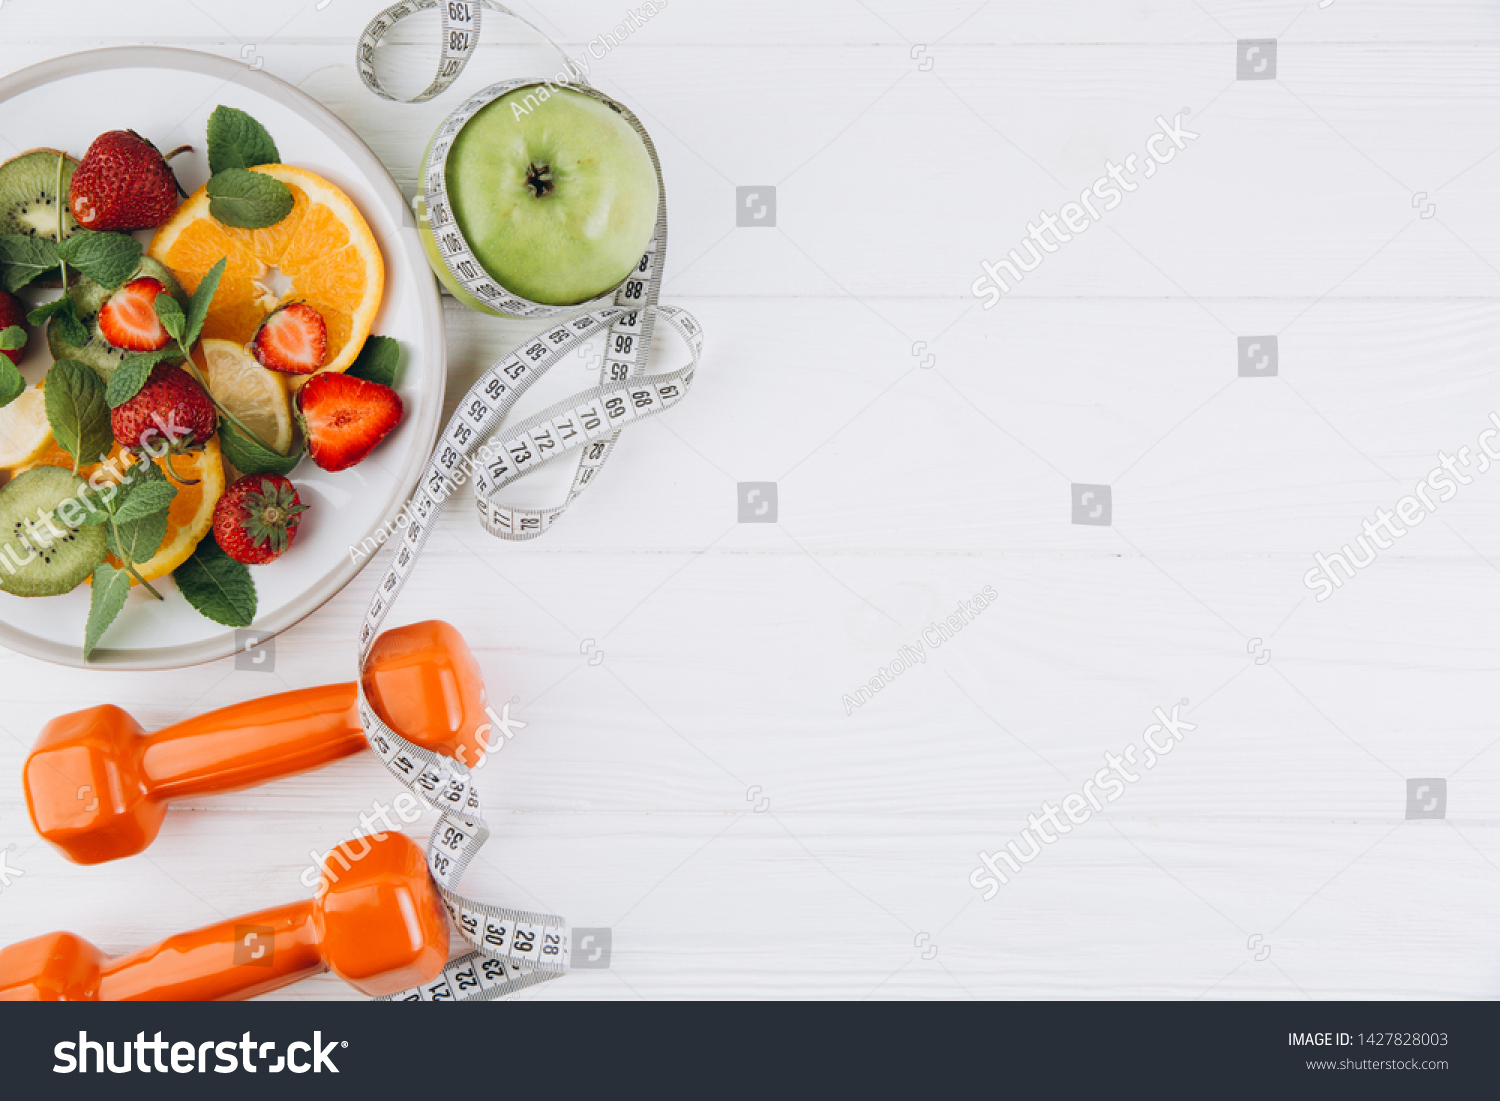 Diet plan, menu or program, tape measure, water, dumbbells and diet food of fresh fruits on white background, weight loss and detox concept, top view #1427828003